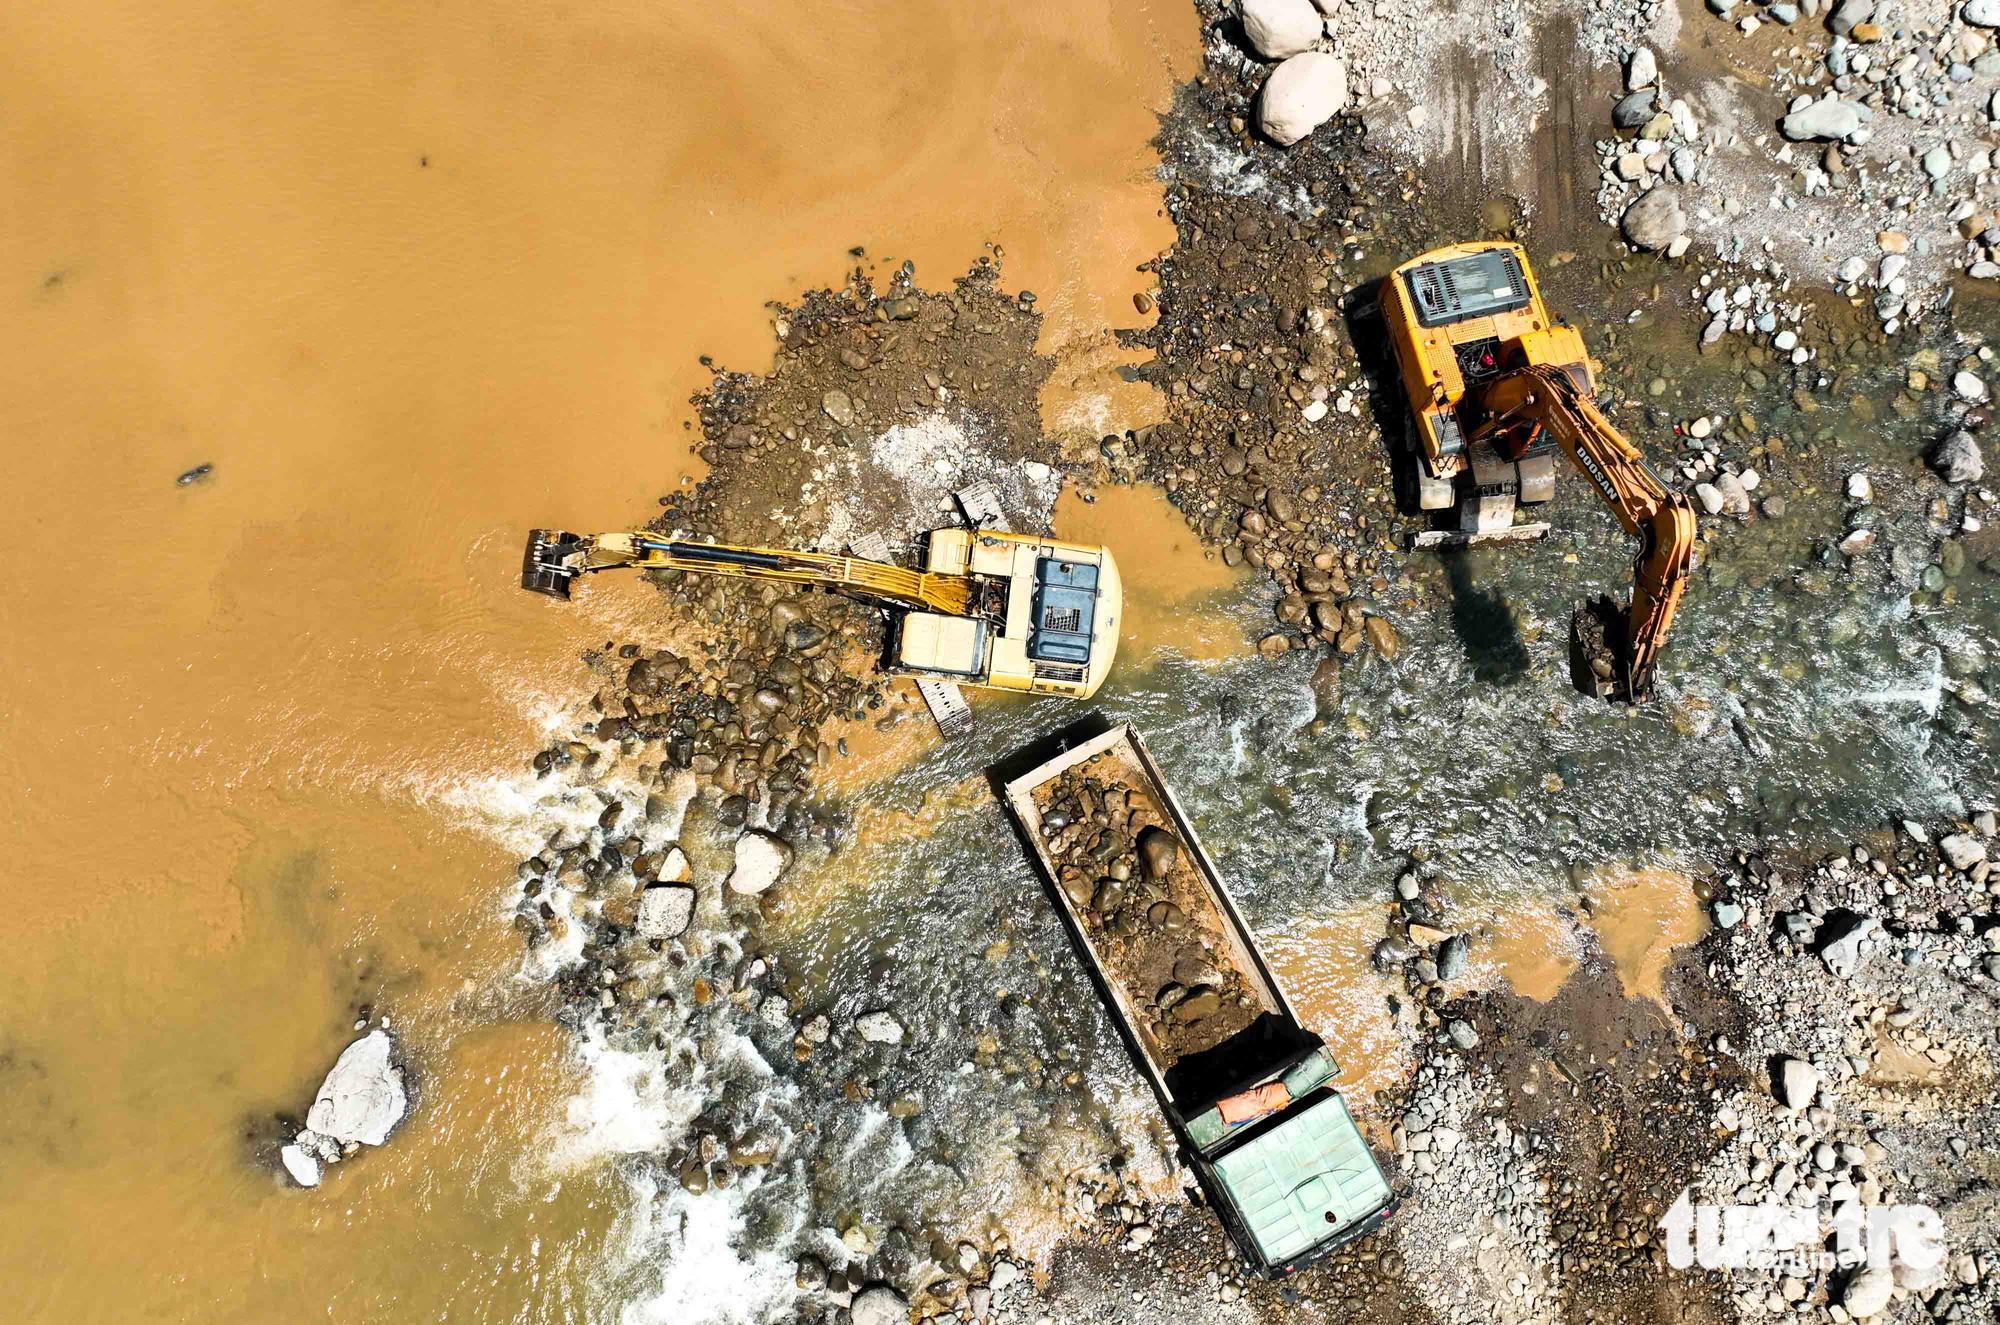 Excavators dredge up stones to clear a downstream section of the Son La hydropower reservoir. Photo: Nguyen Khanh / Tuoi Tre